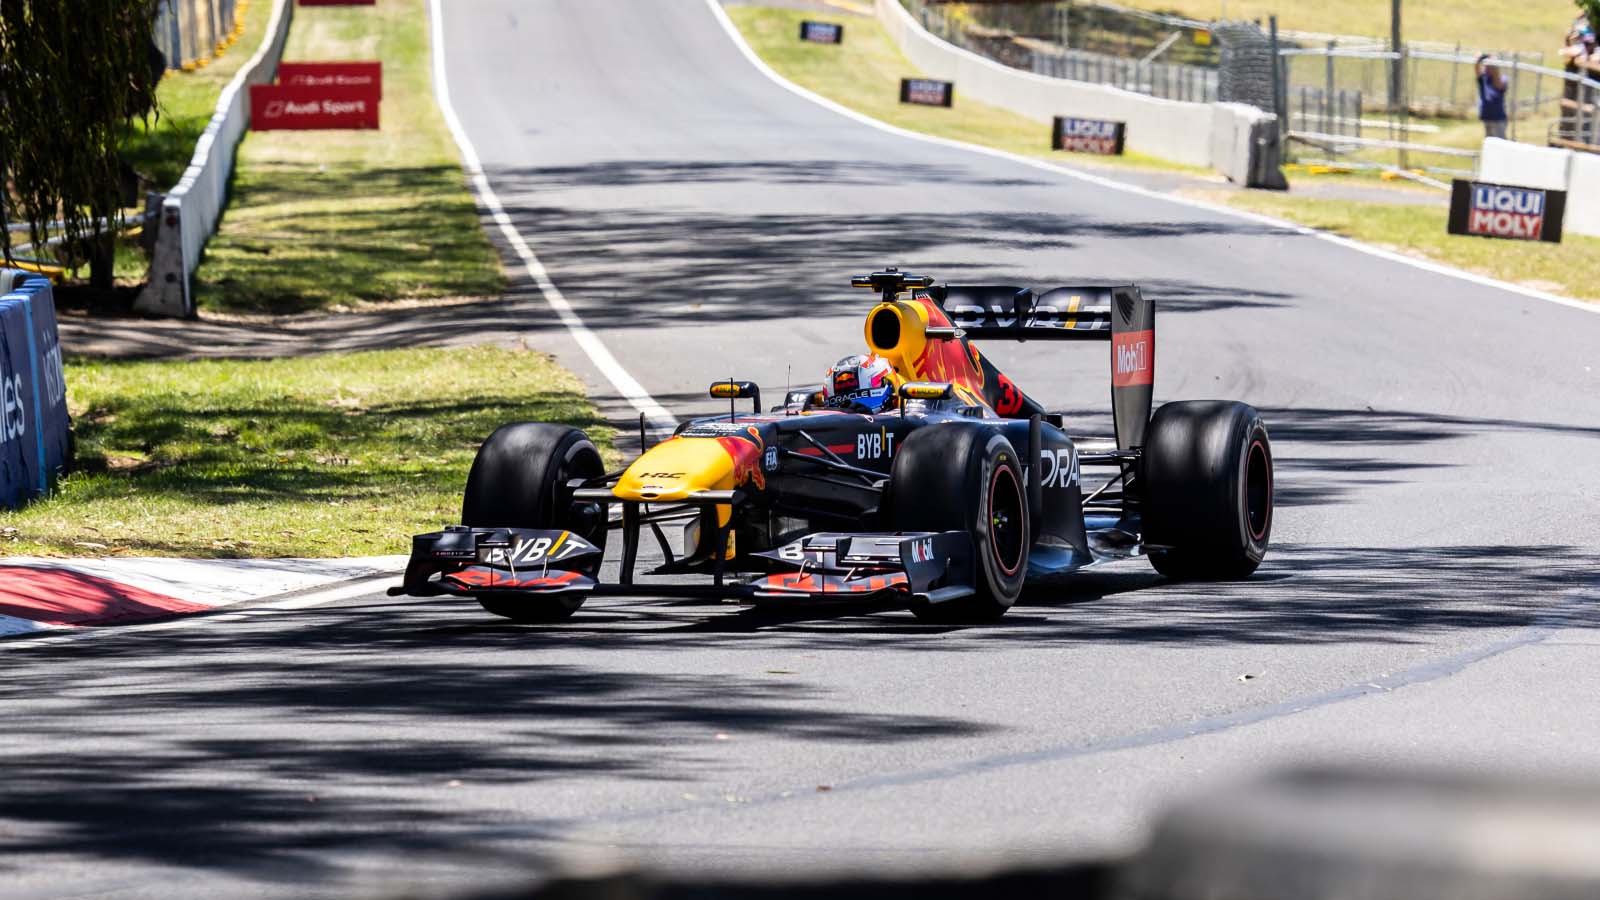 Liam Lawson in the Red Bull RB7. Bathurst February 2023.